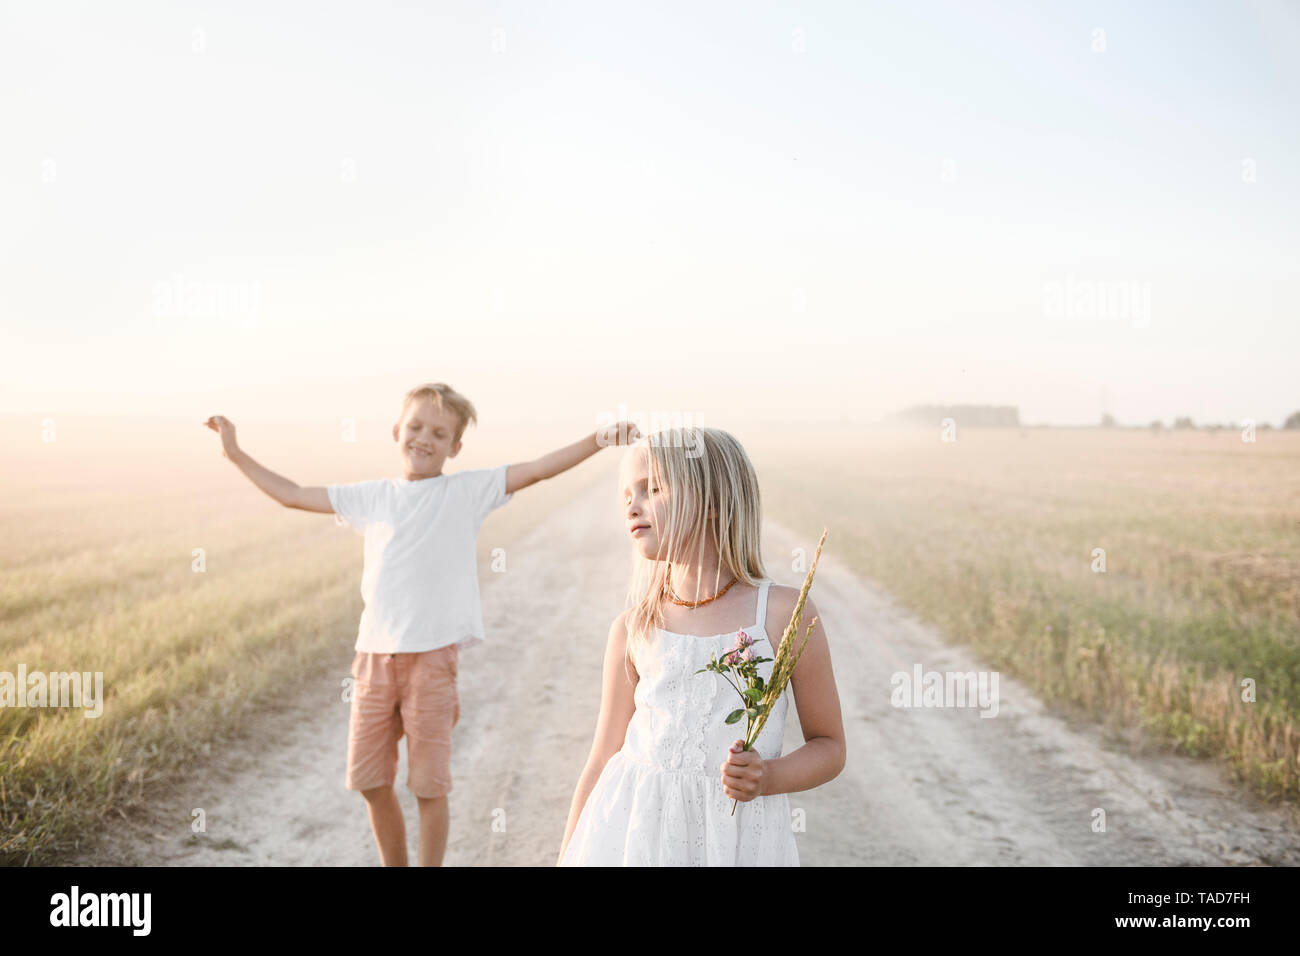 Girl and boy on a rural dirt track Stock Photo